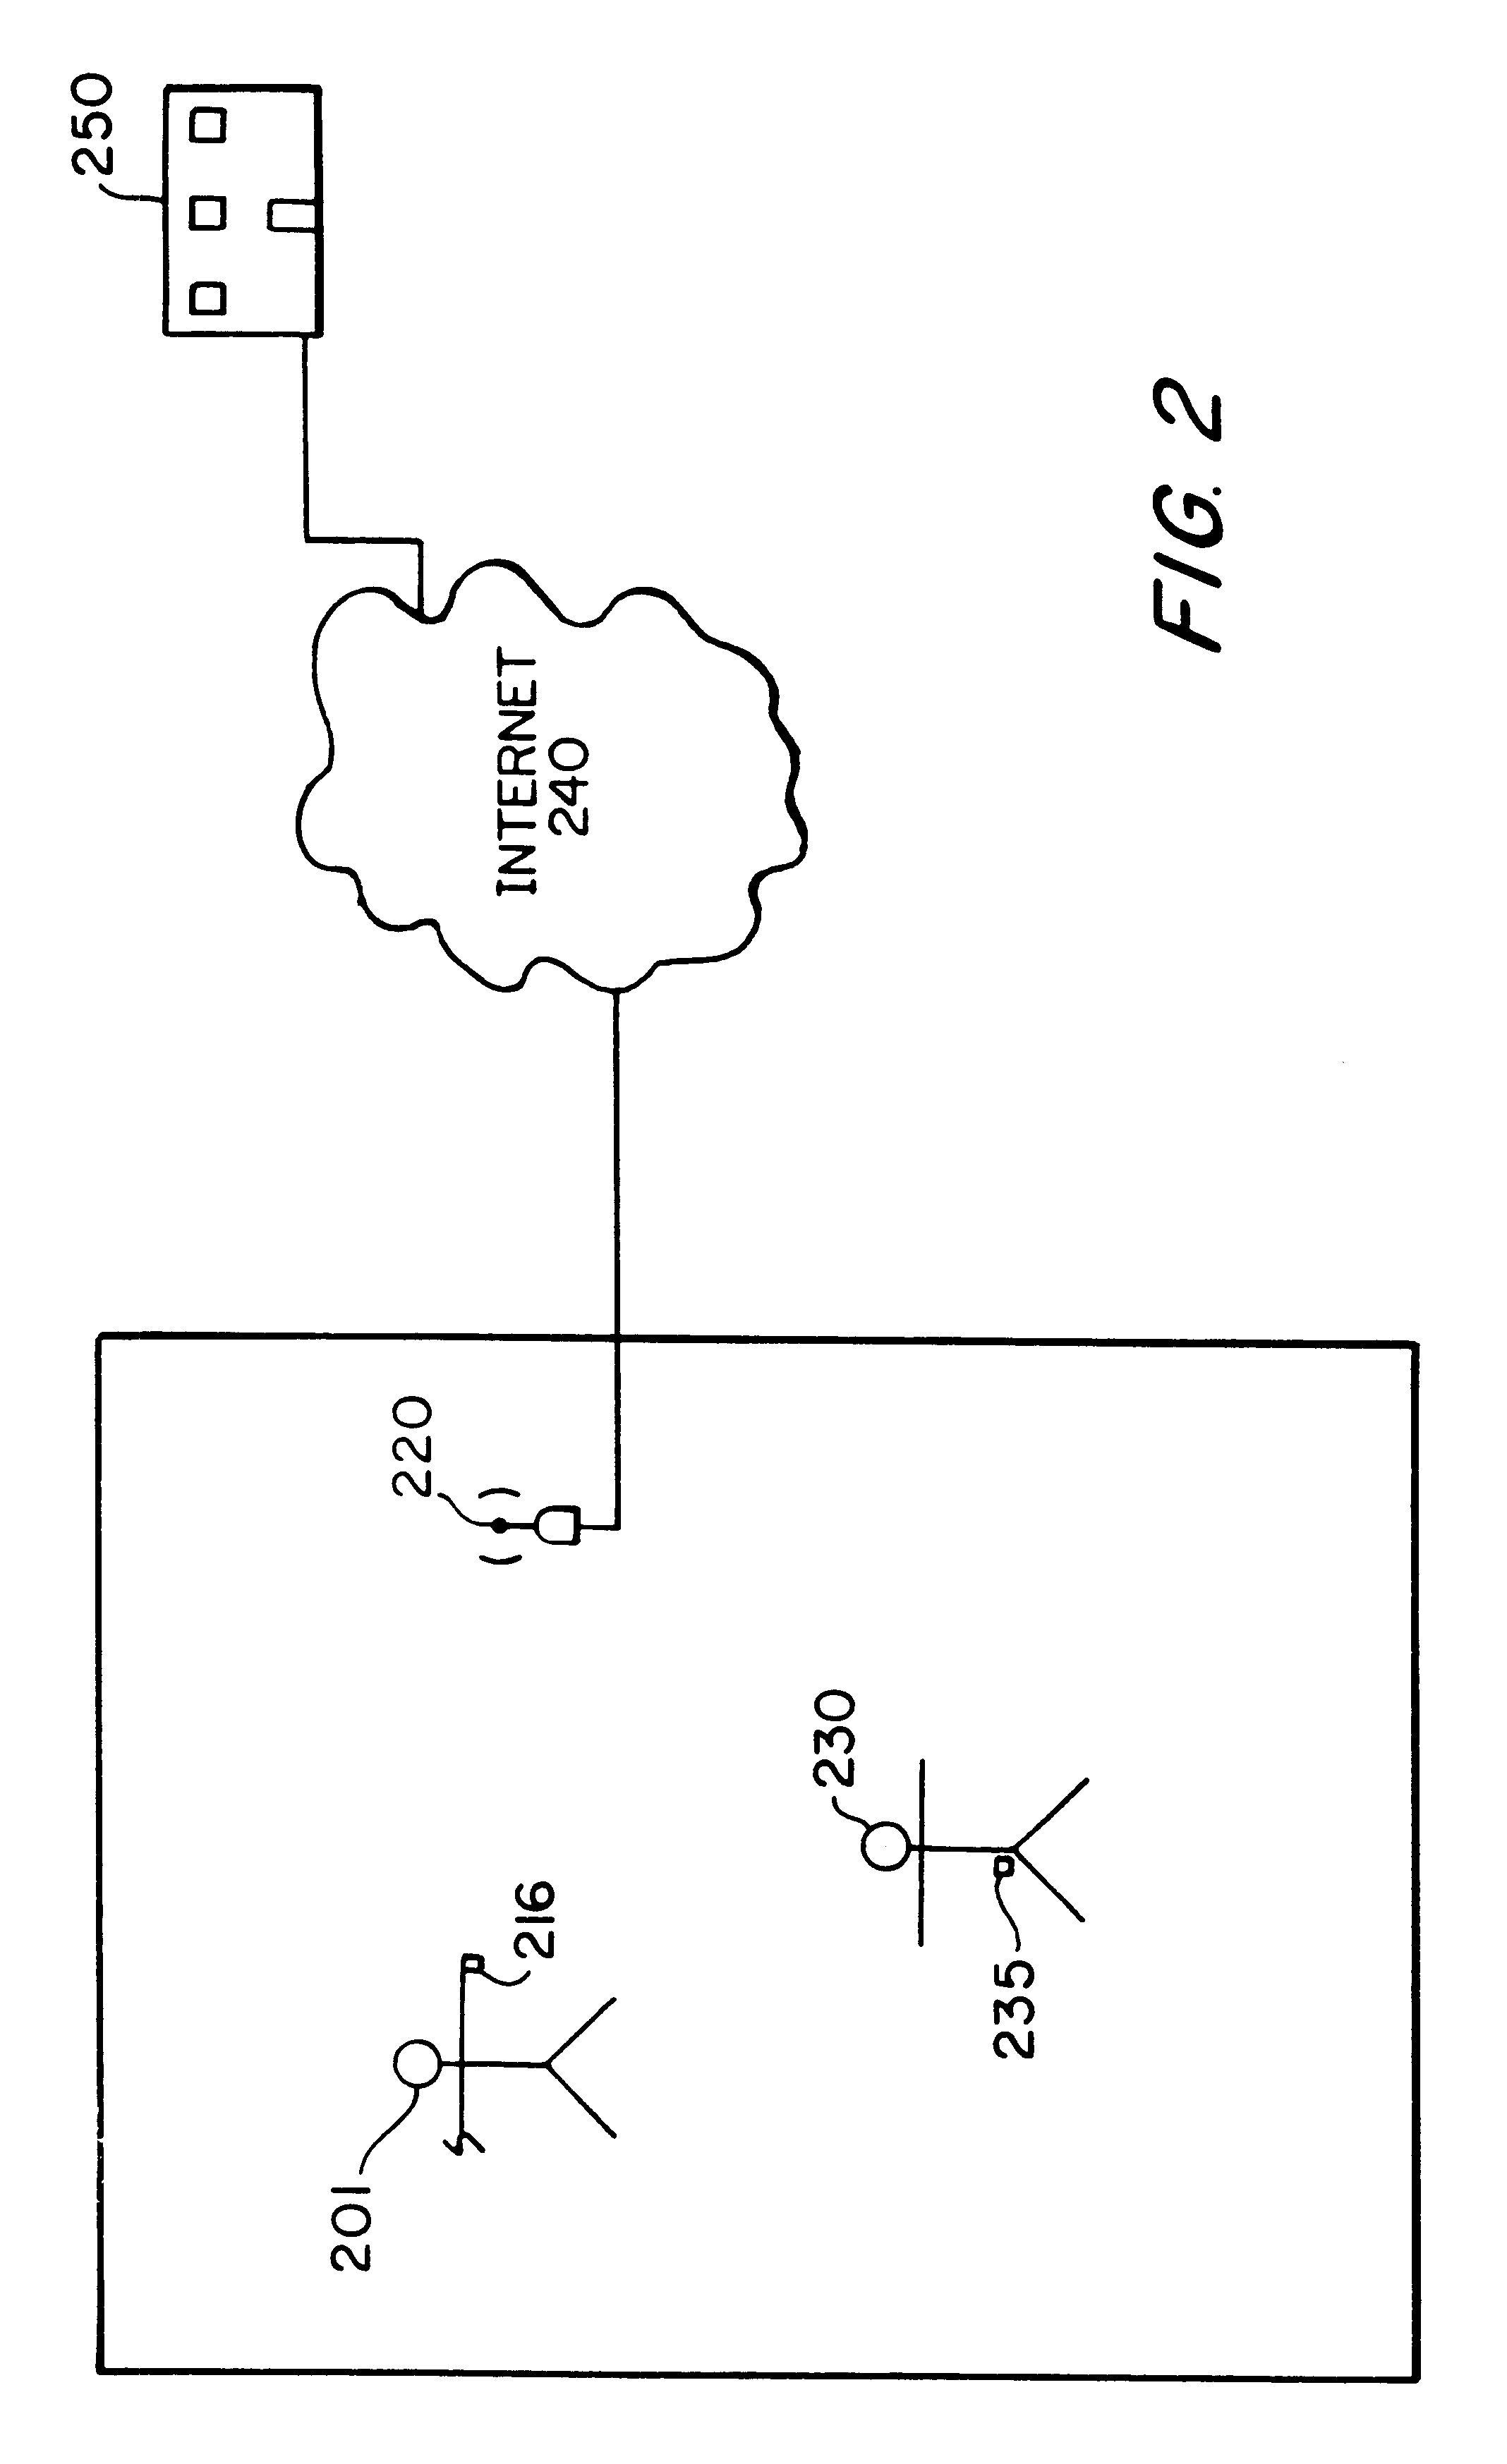 System and method of monitoring and modifying human activity-based behavior